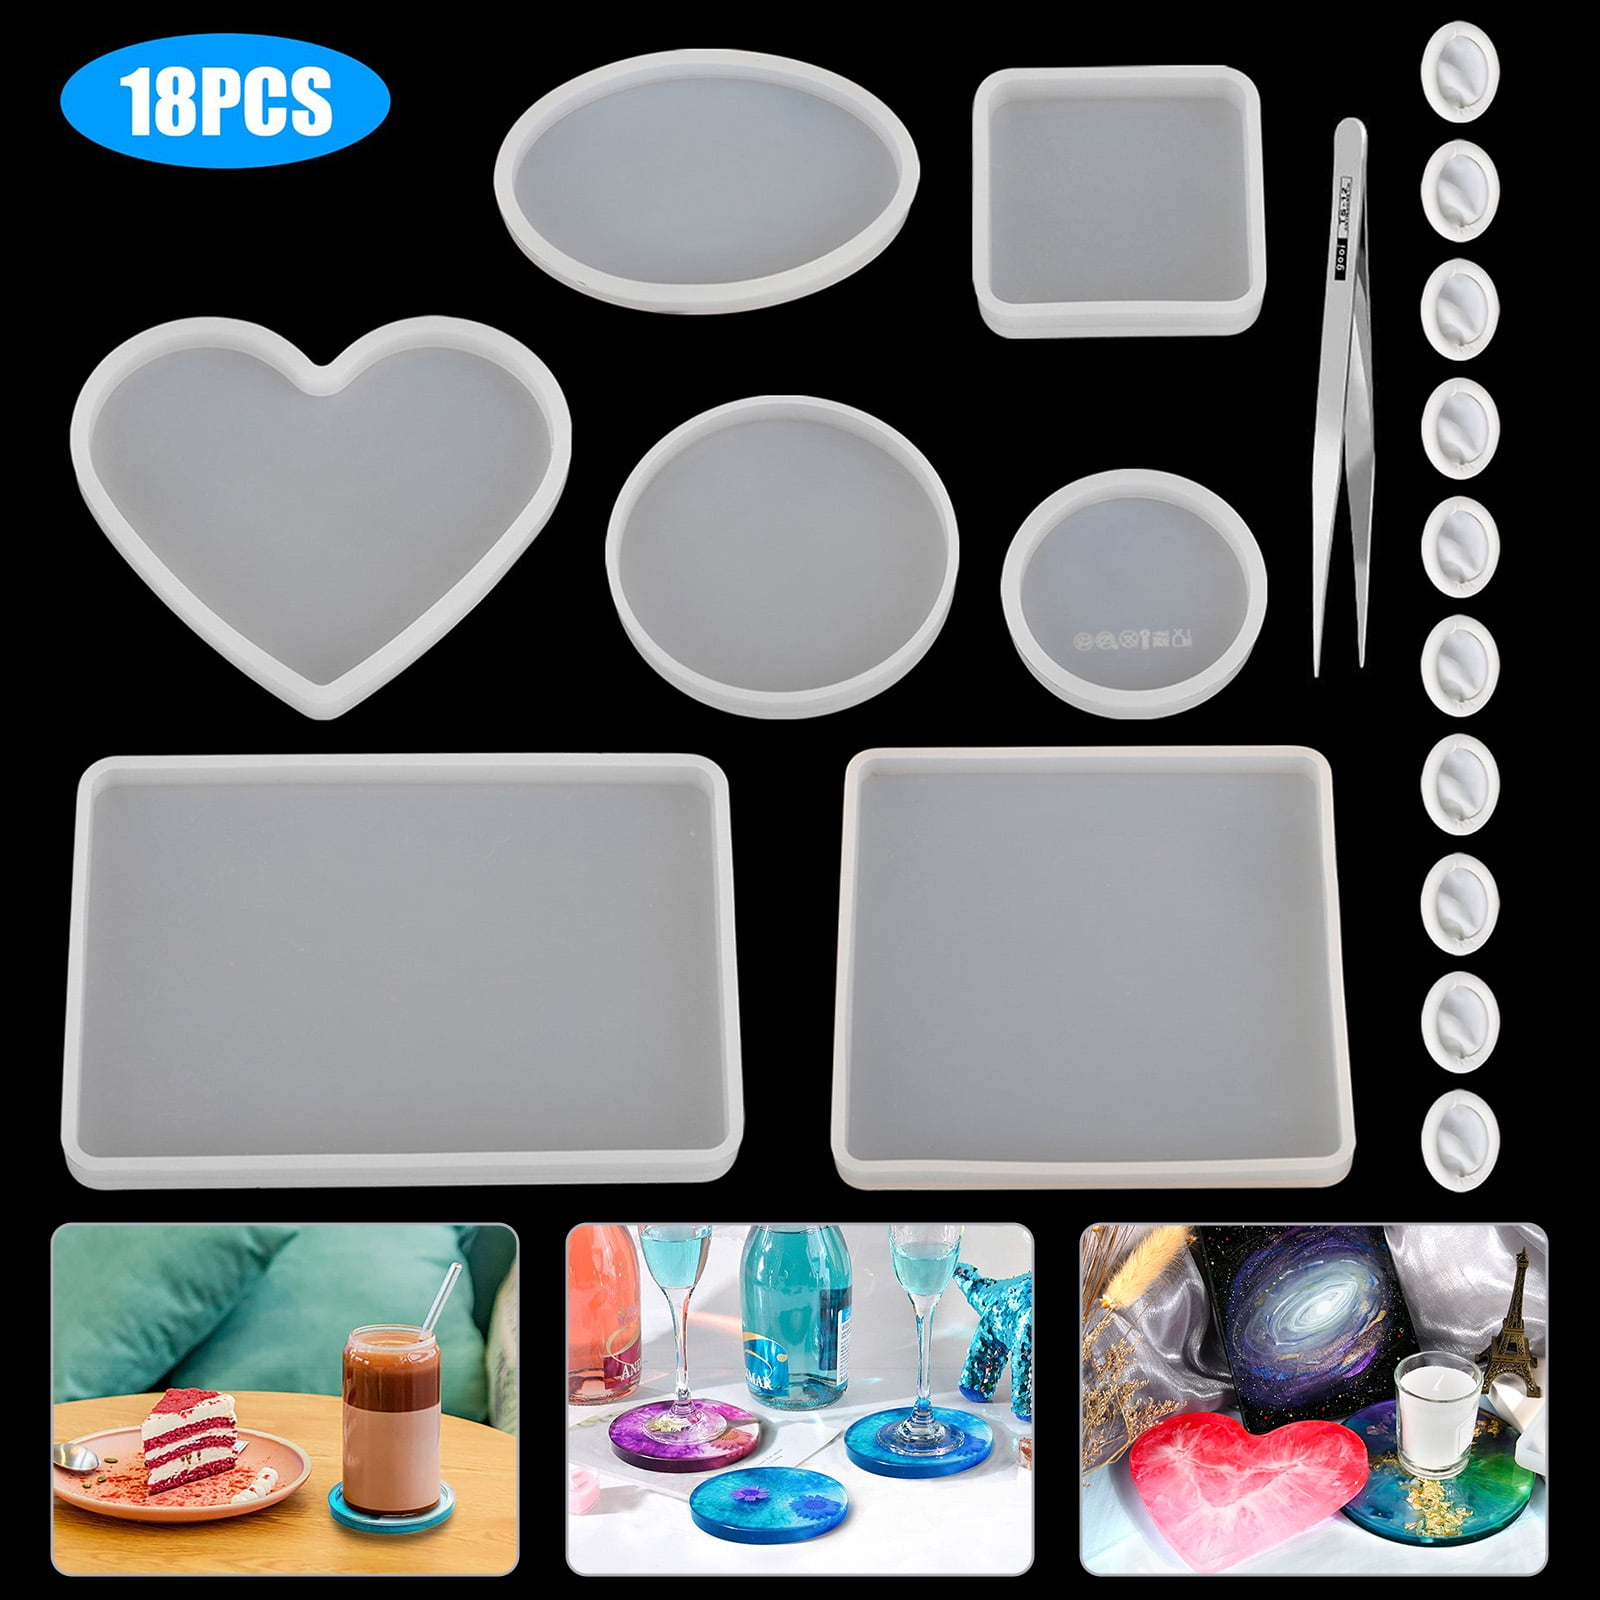 3PCS Diamond Resin Tray Mold with Edges, Silicone Tray Mold for Resin  Casting, Square Rectangle Round Epoxy Mold DIY Jewelry Plate Box Candle  Holder